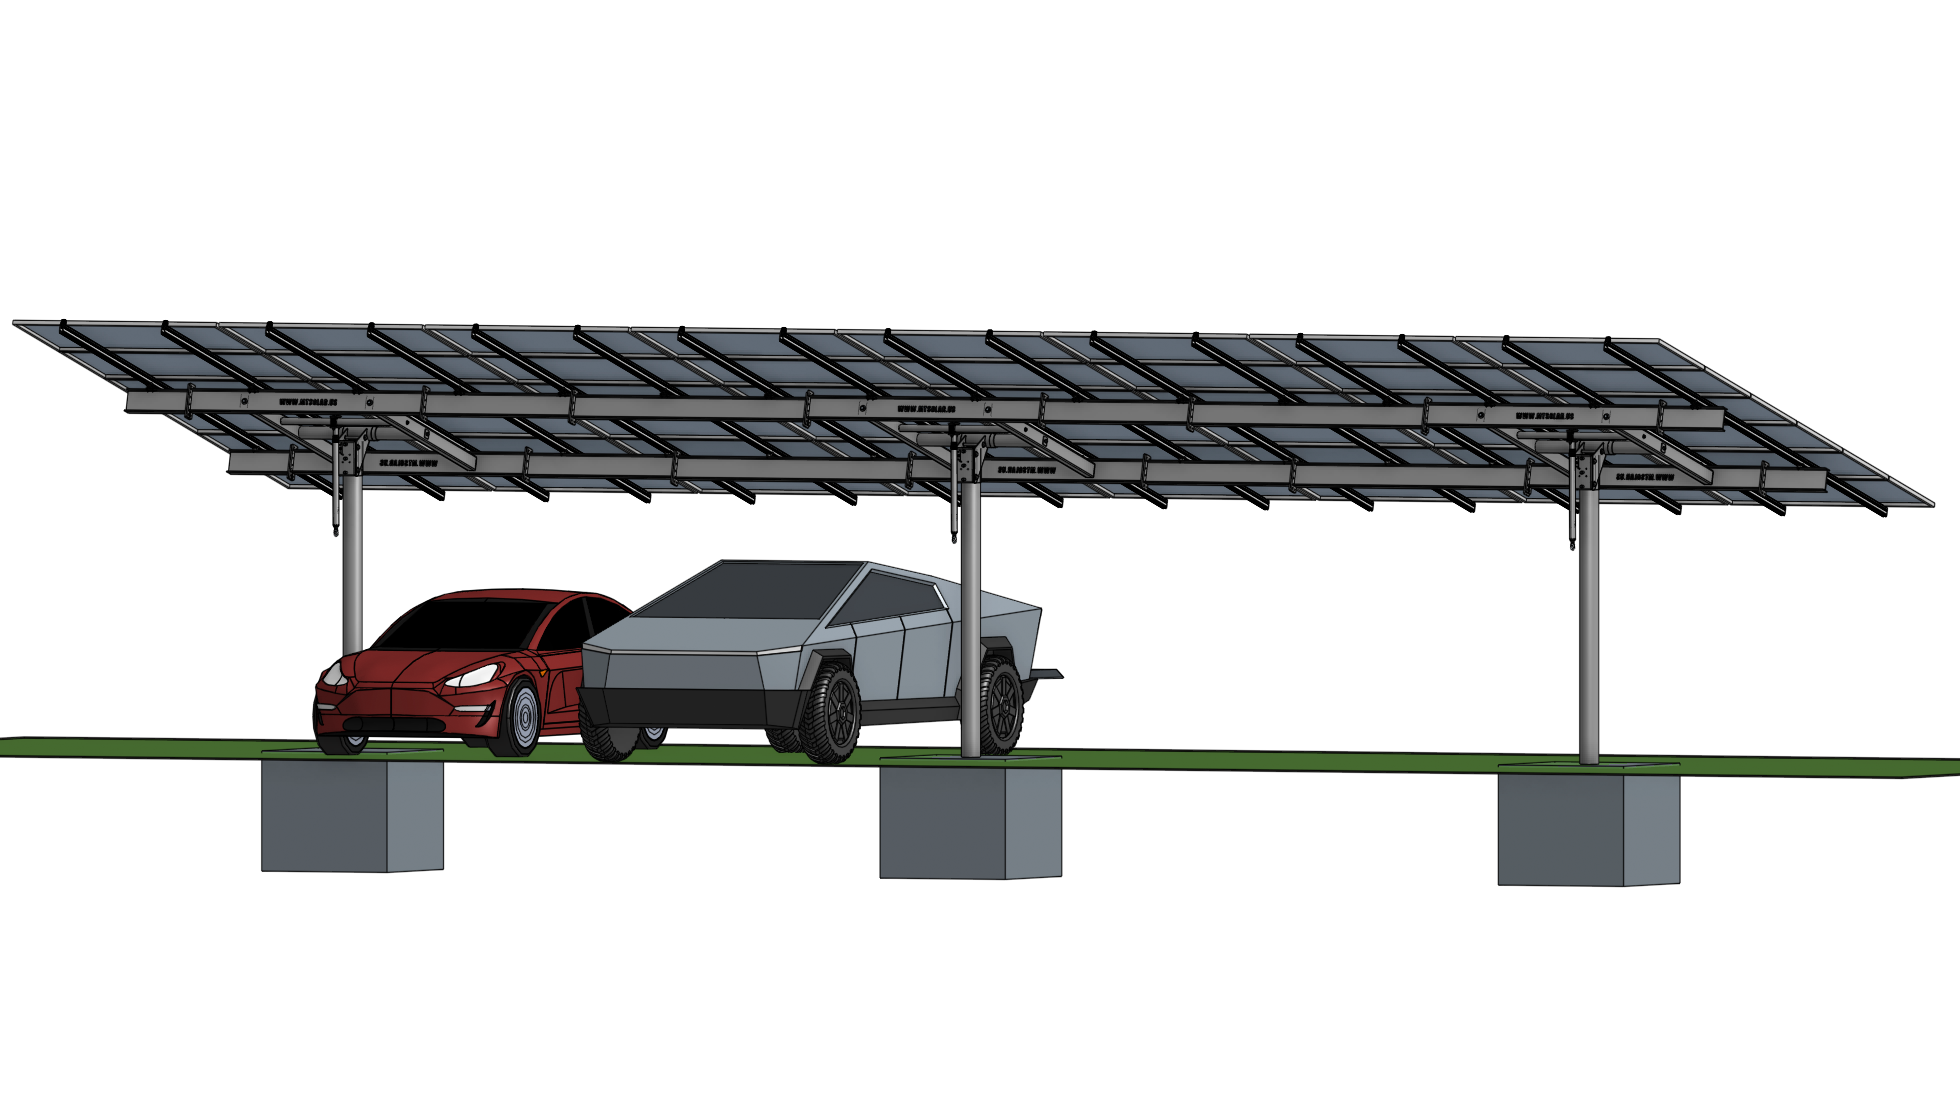 solar carport drawing with two electric vehicles parked beneath